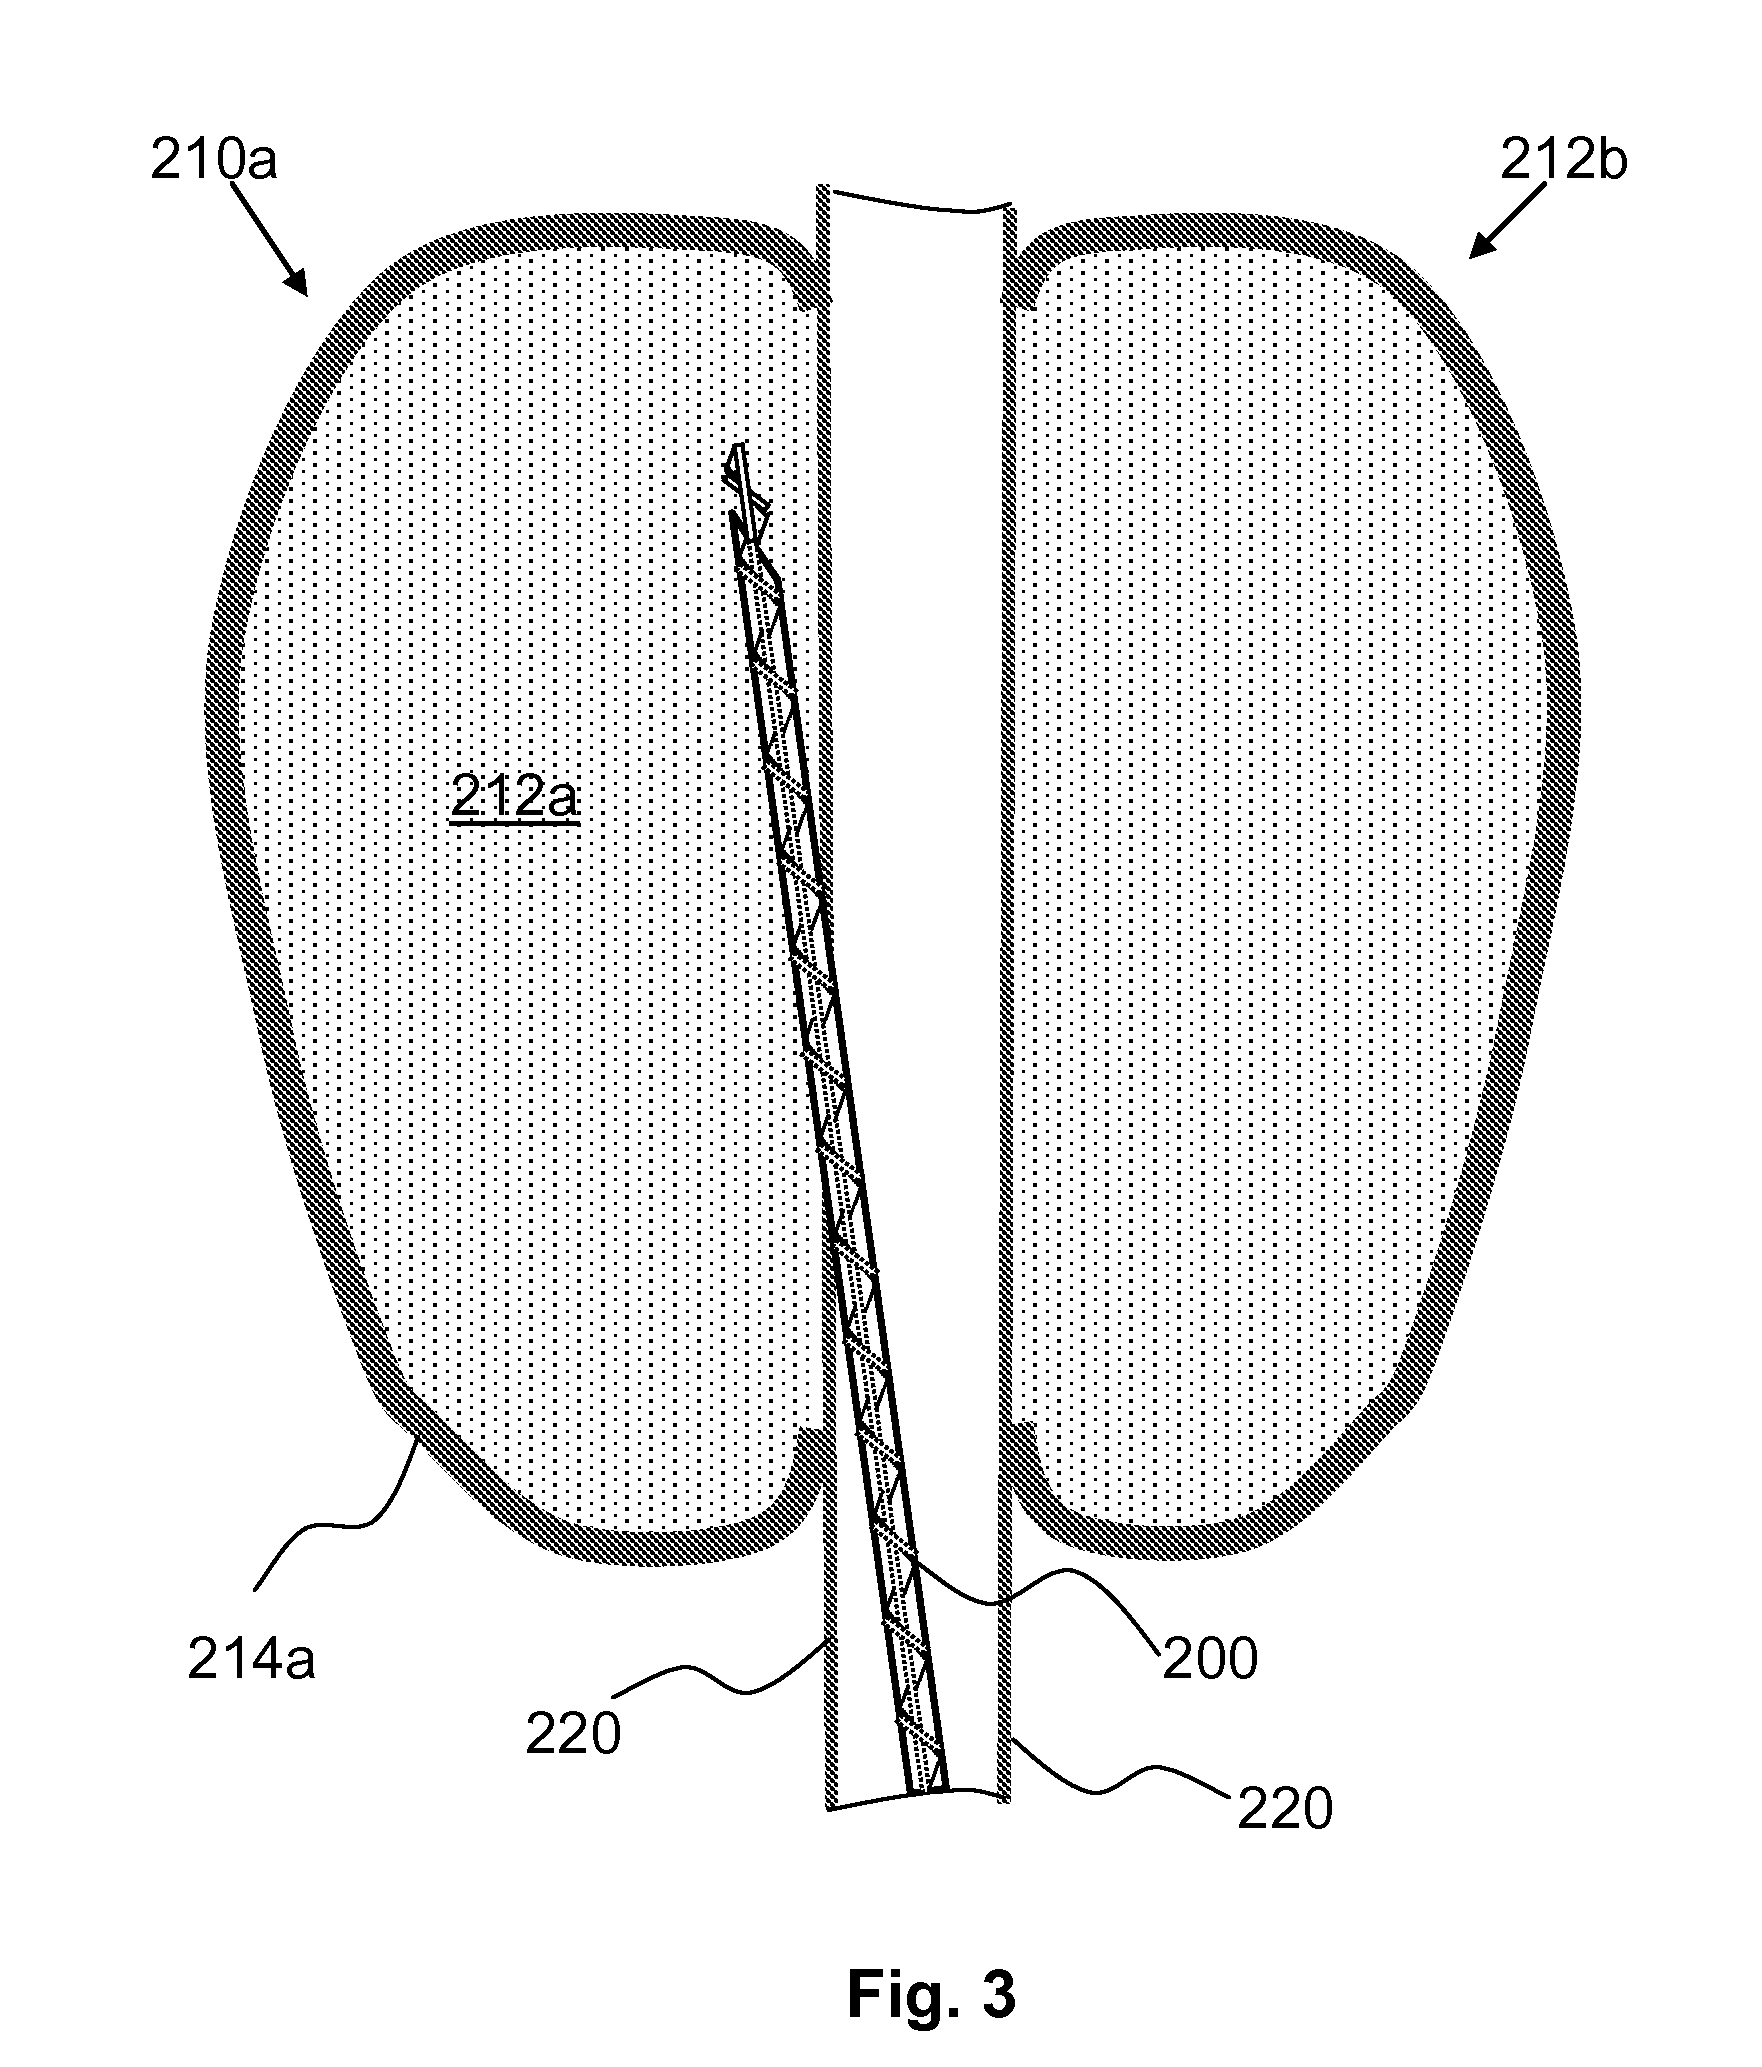 Method and device for tissue removal and for delivery of a therapeutic agent or bulking agent